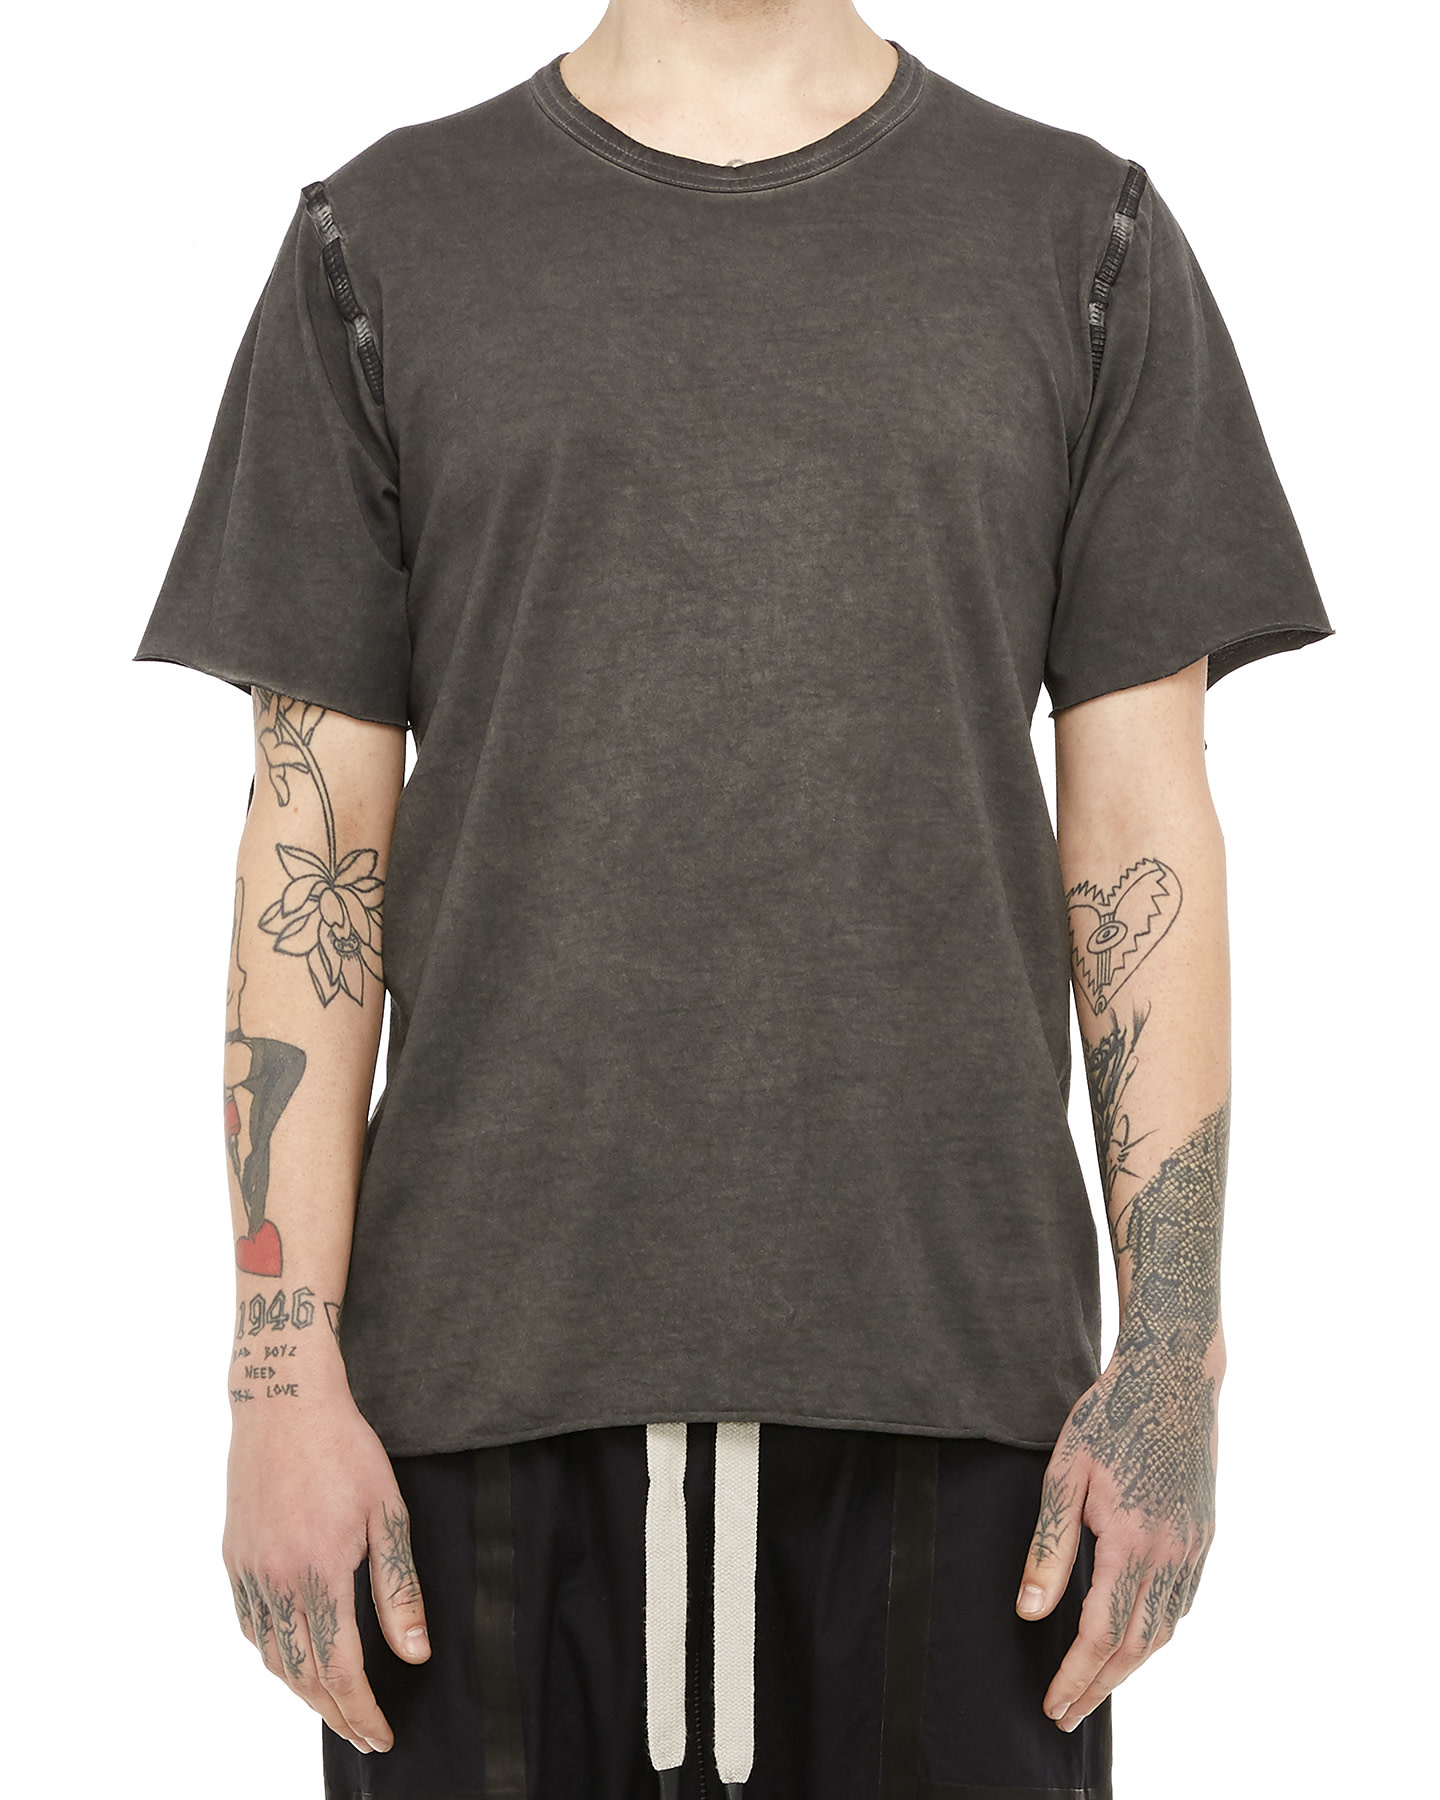 INTERSECTION LEATHER TAPED T-SHIRT - LEAD